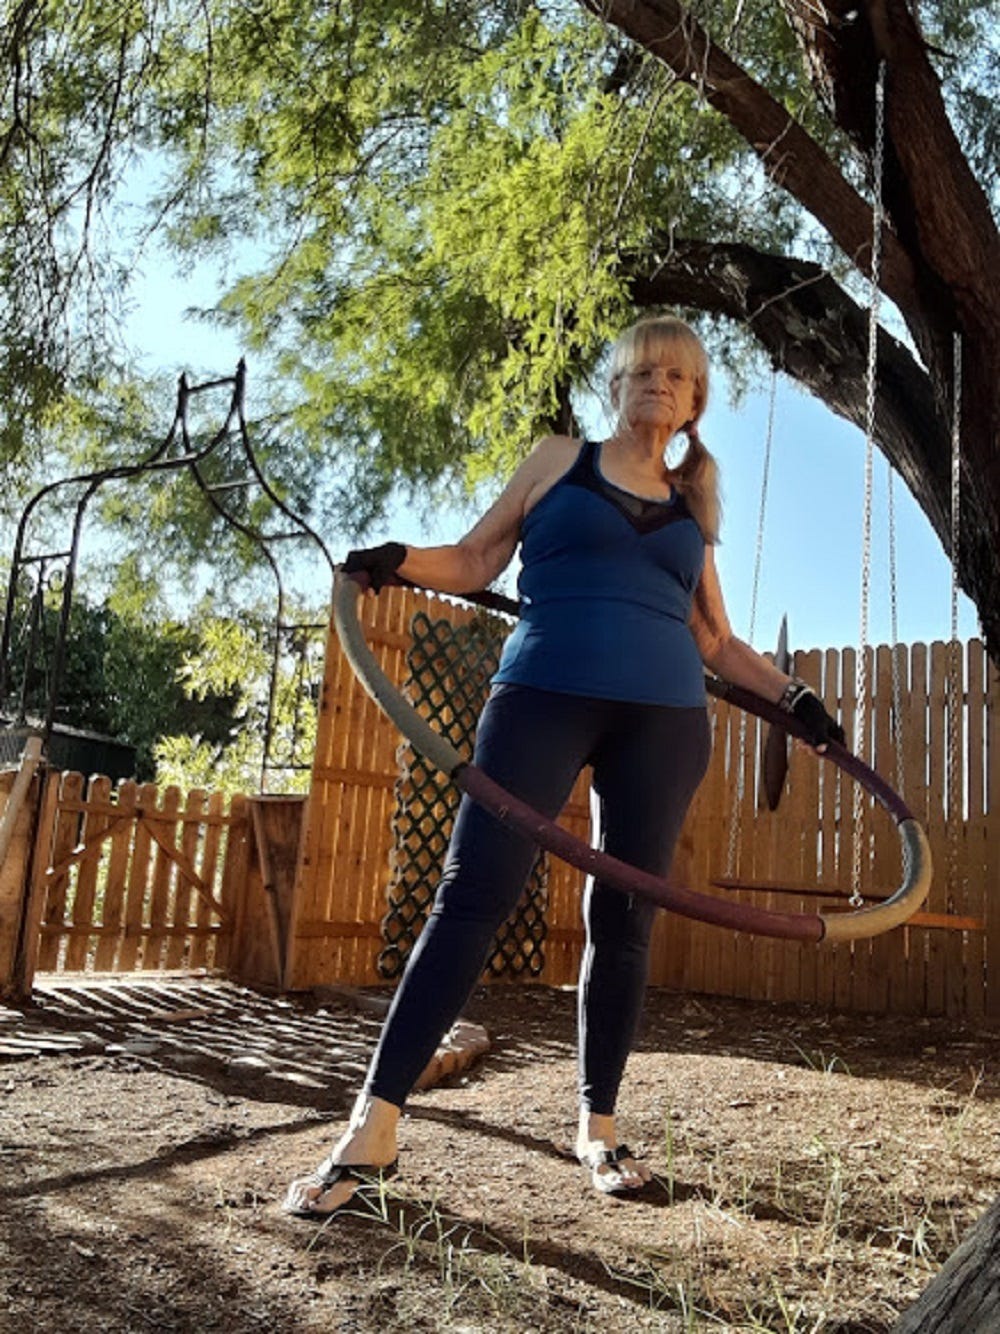 Hula Hooping Brings Me Joy. It's fun AND healthy! | by Suzy Jacobson Cherry  | Bouncin' and Behavin' Blogs | Medium